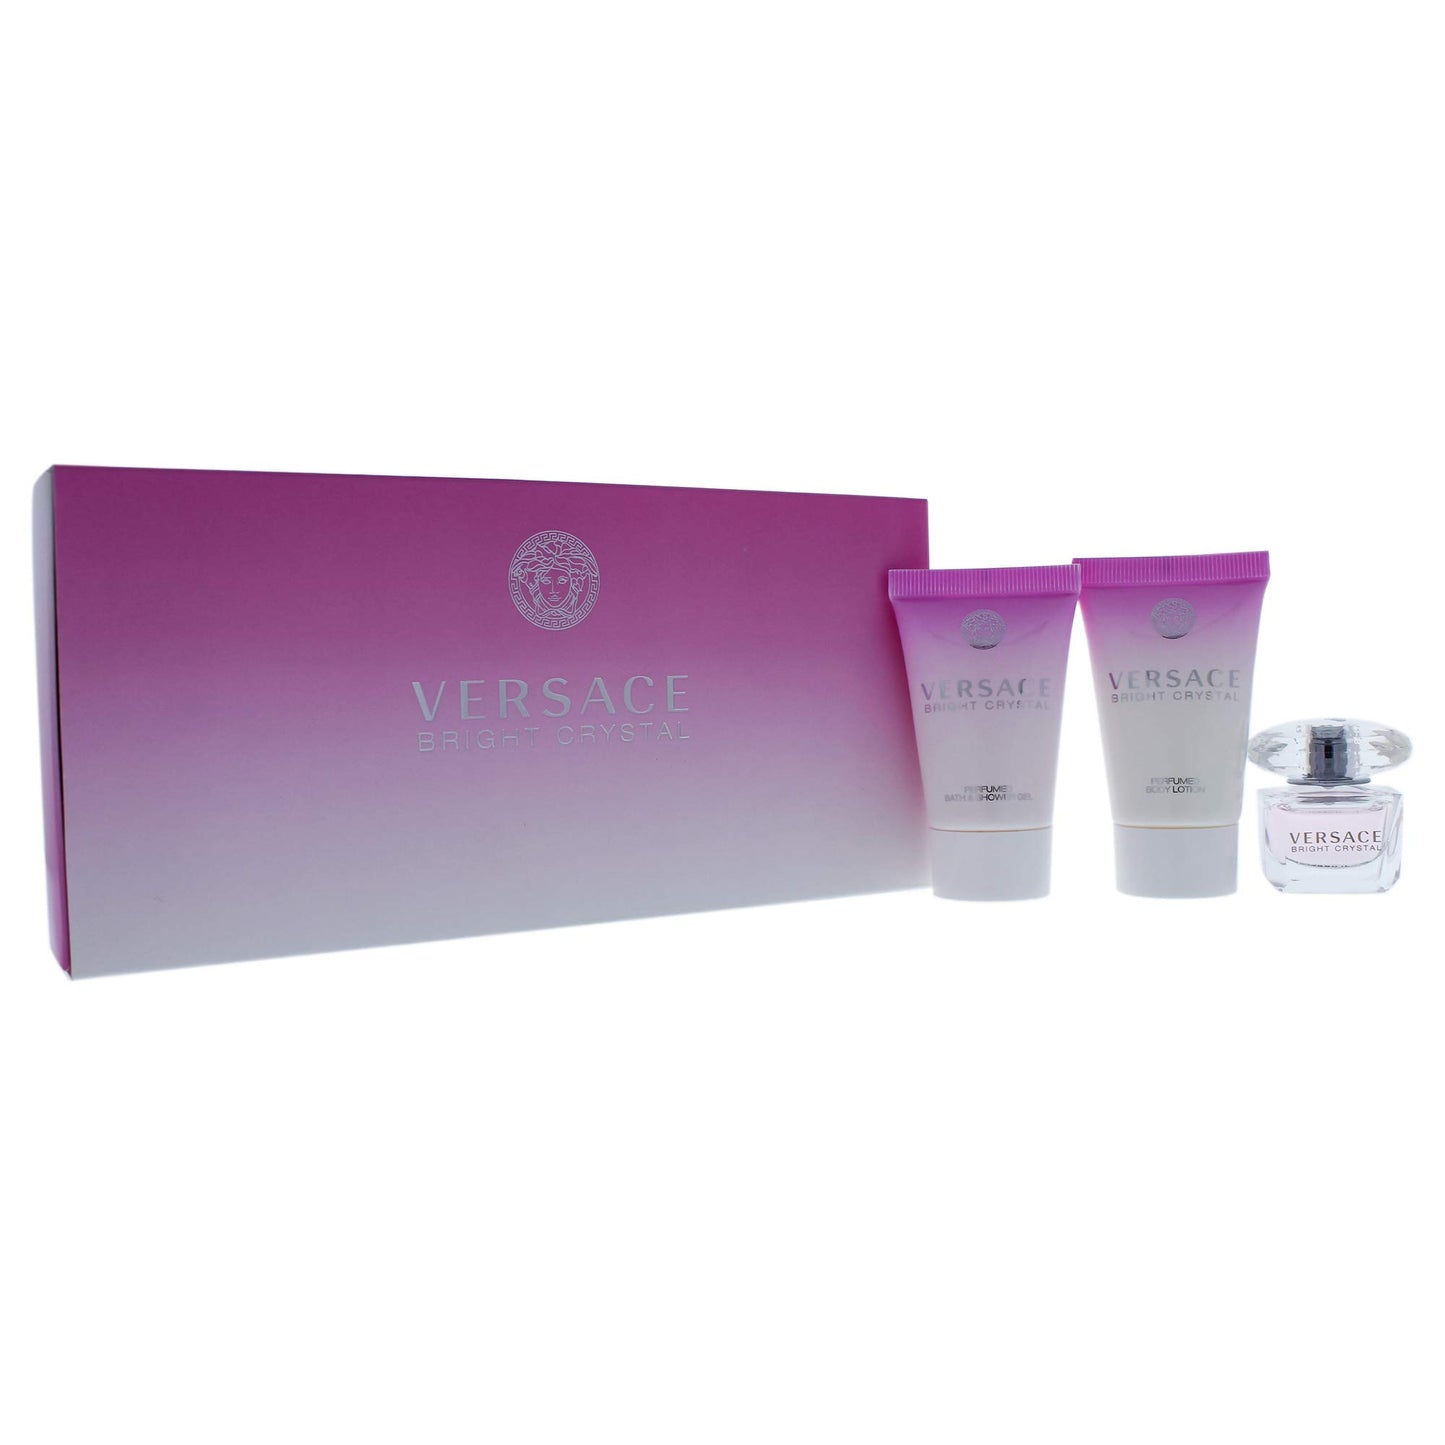 Versace Bright Crystal 3 Pieces Mini Set For Women - 1 EDT 5 ml +25 ml Shower Gel +25 ml Body Lotion